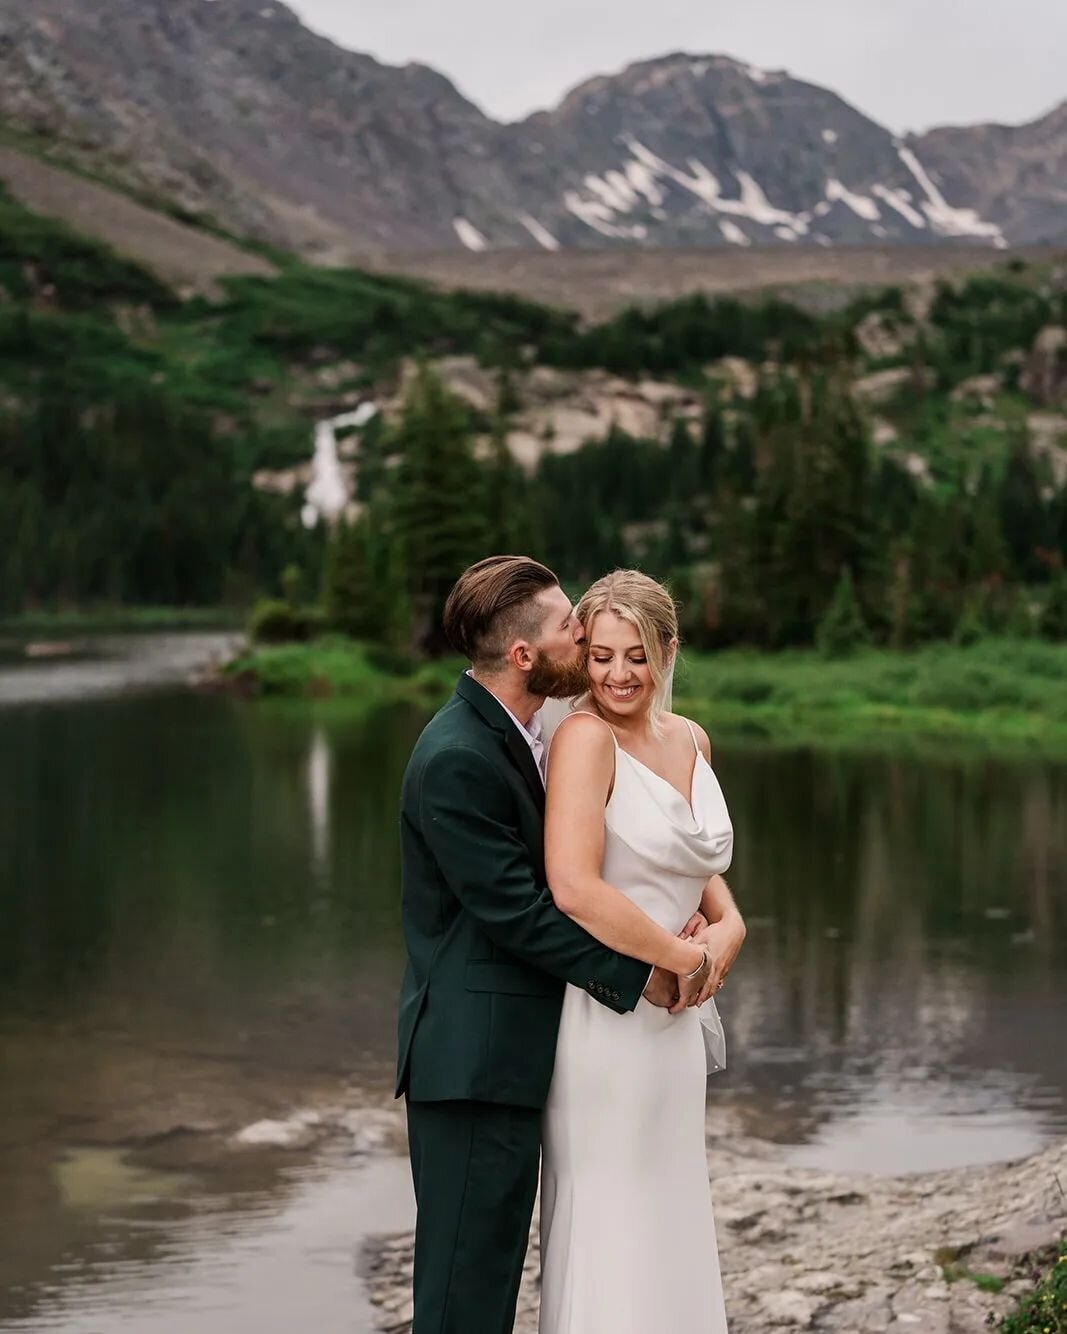 Exchange your vows in an elegant elopement ceremony at a cozy mountain lodge, and let Sam Immer Photography capture the beauty and joy of the moment.